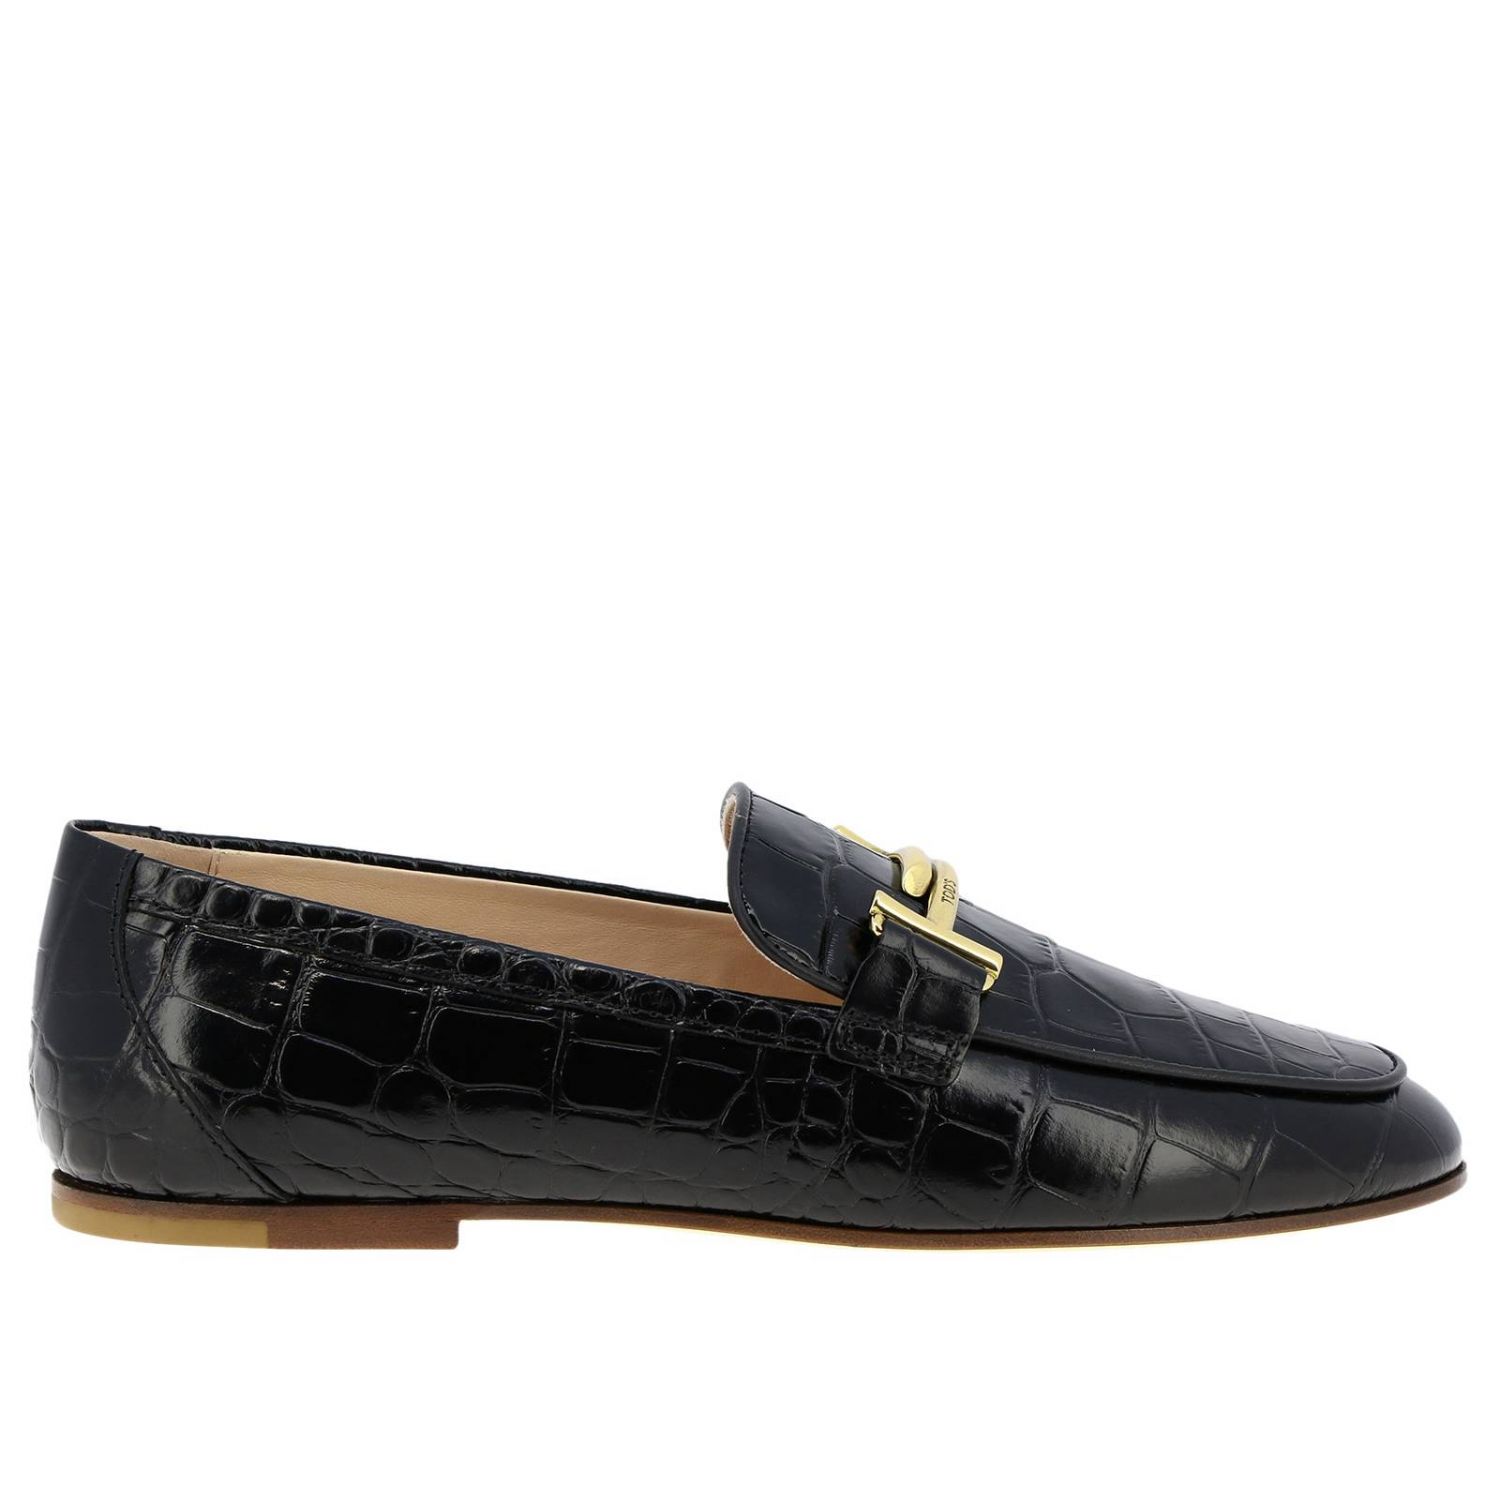 TODS: Double T Tod's loafers in crocodile print leather | Loafers Tods ...